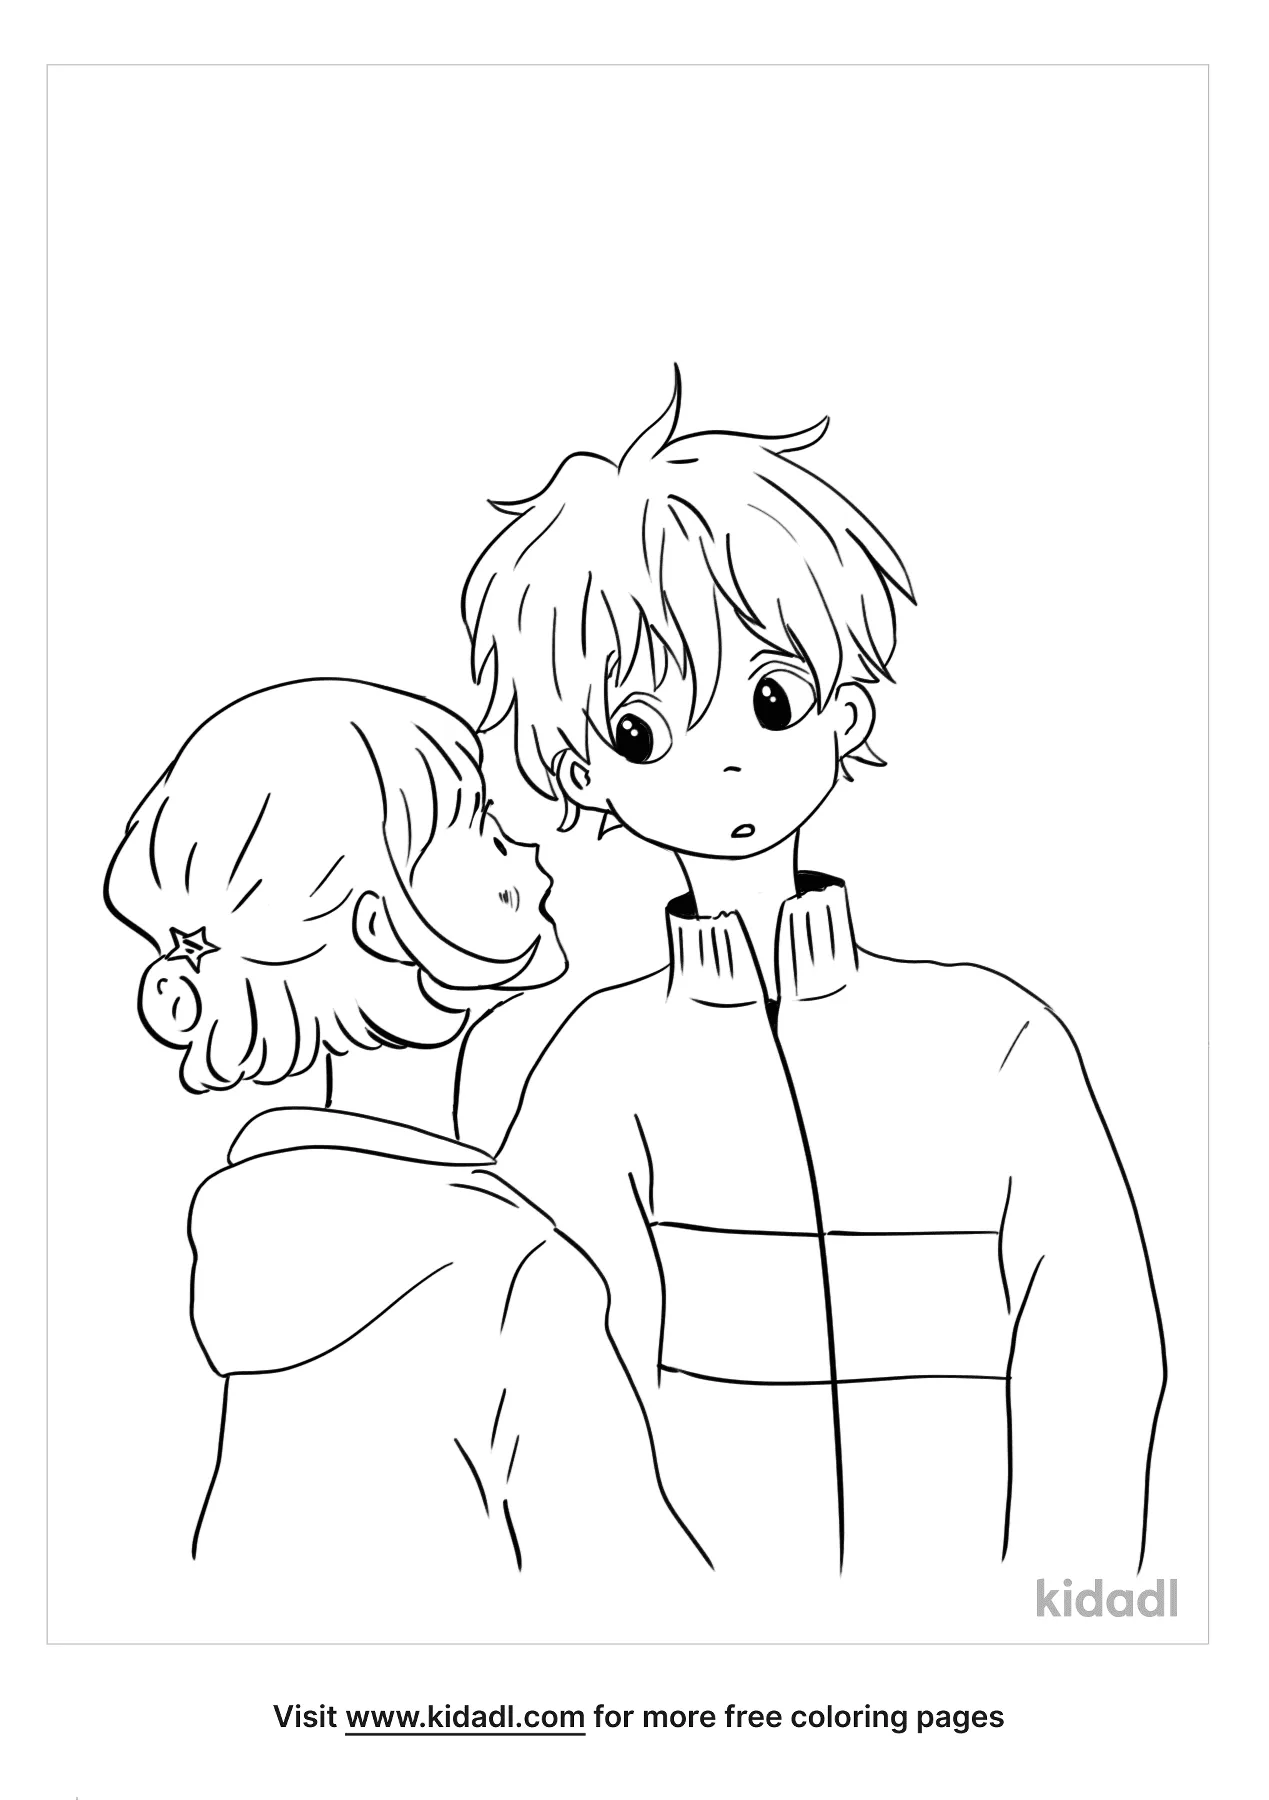 Free Cute Anime Couple Coloring Page | Coloring Page Printables | Kidadl